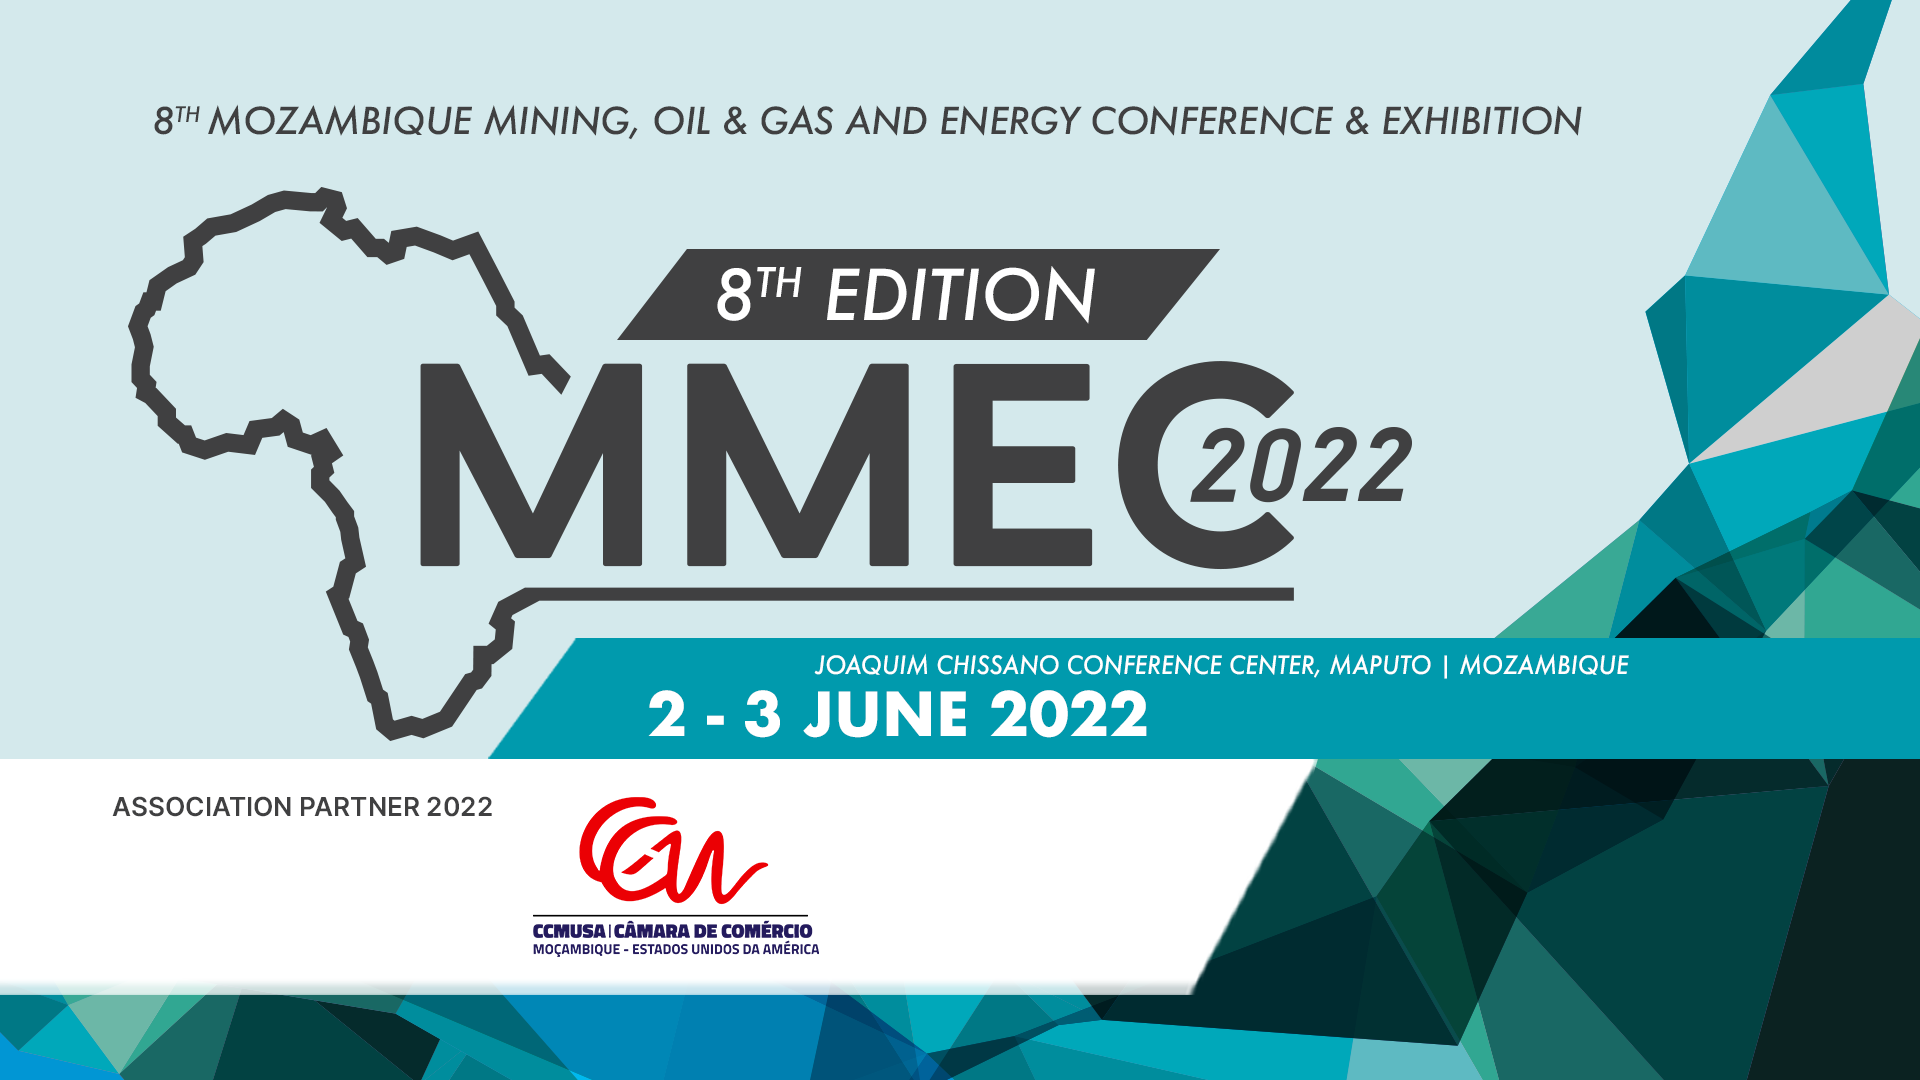 8th Mozambique Mining, Oil & Gas and Energy Conference & Exhibition